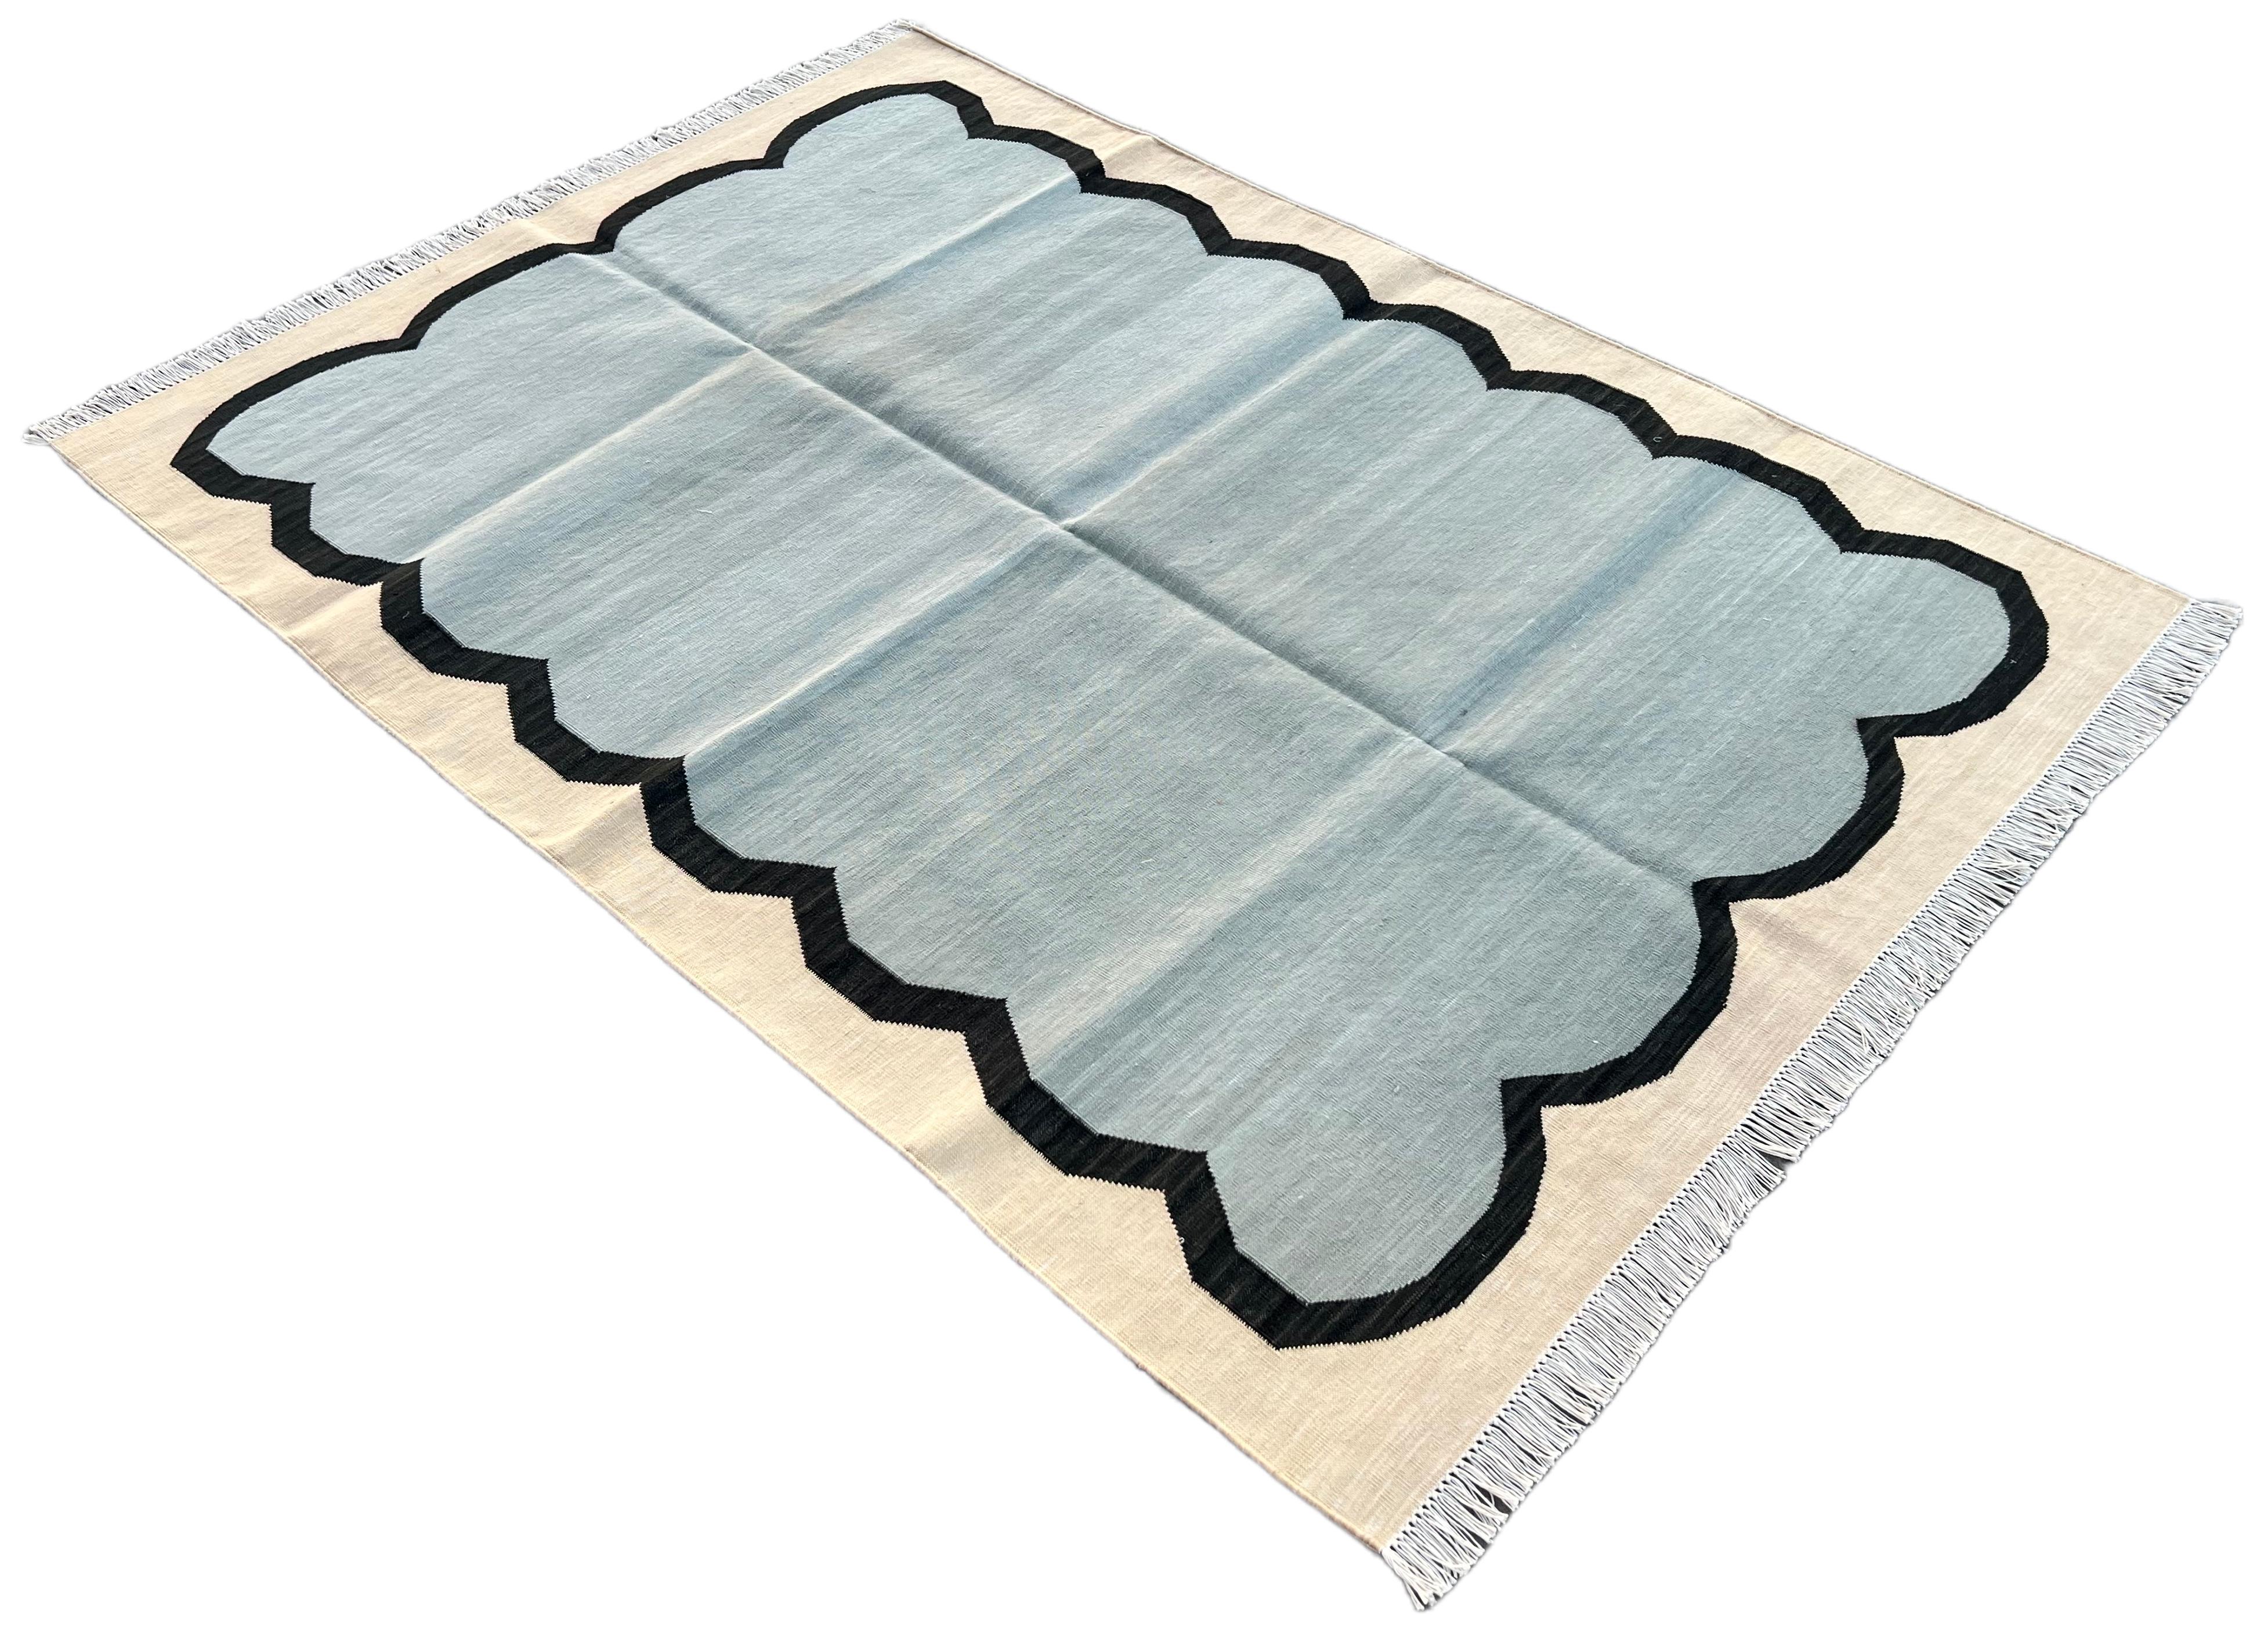 Cotton Natural Vegetable Dyed, Blue, Black And Cream Scalloped Striped Indian Rug - 4'x6'
These special flat-weave dhurries are hand-woven with 15 ply 100% cotton yarn. Due to the special manufacturing techniques used to create our rugs, the size